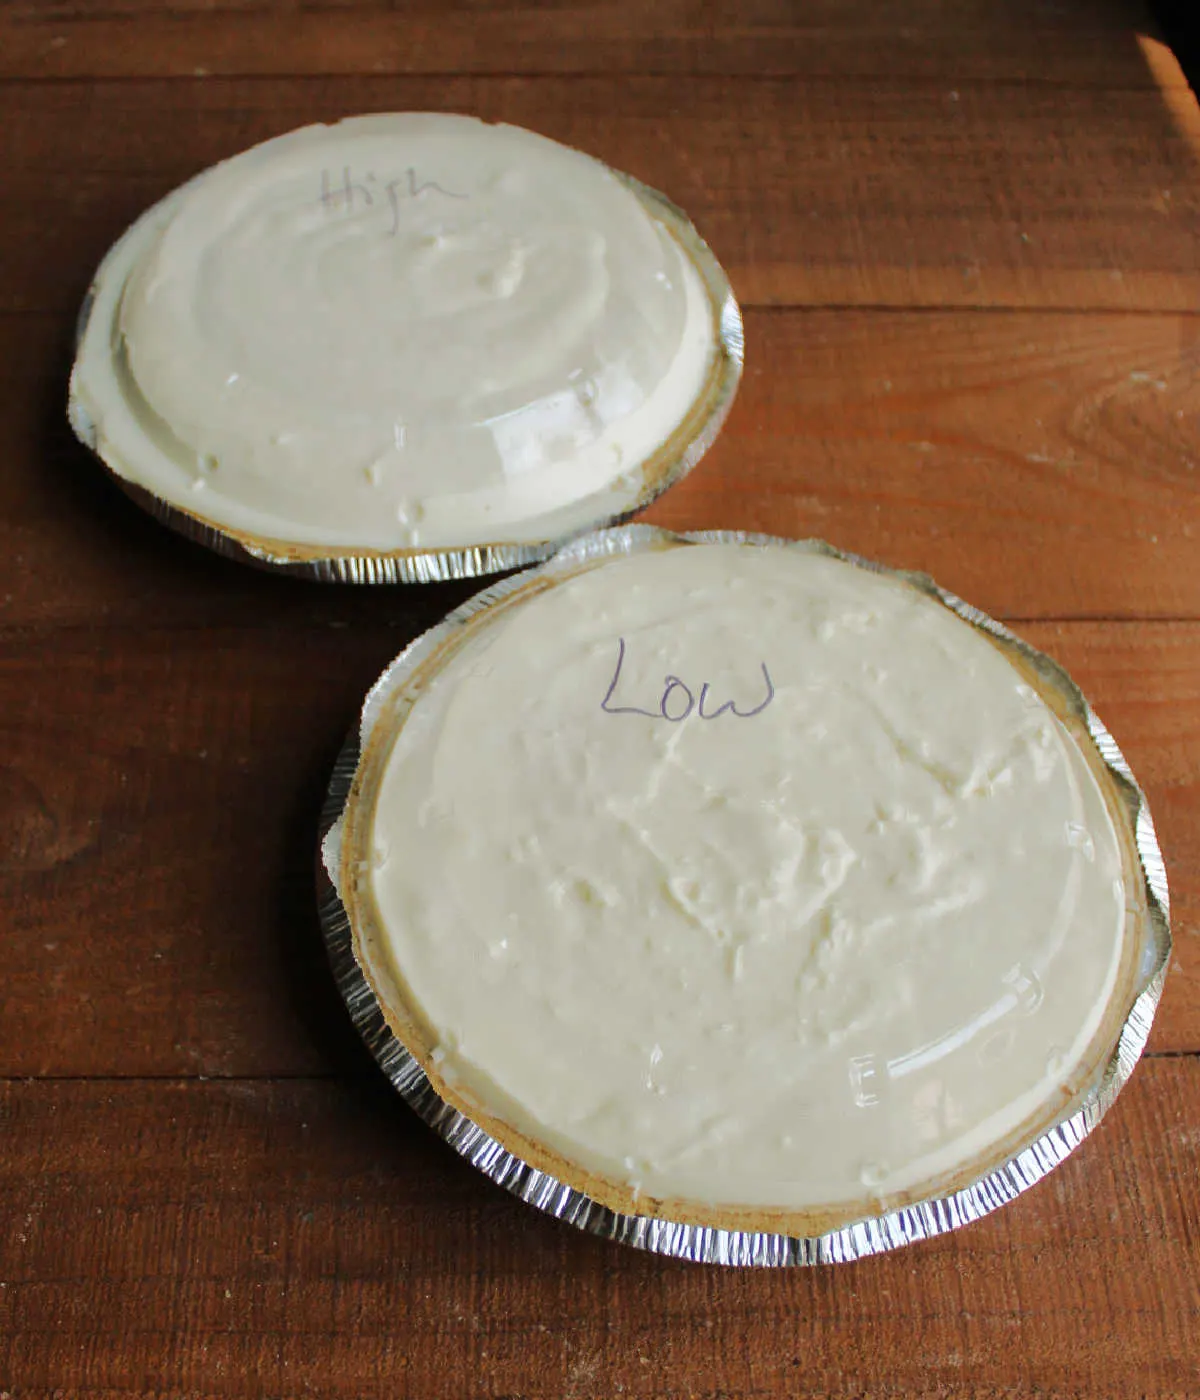 Two no baked cheesecake, one that was mixed on low and the other that was beaten on high.